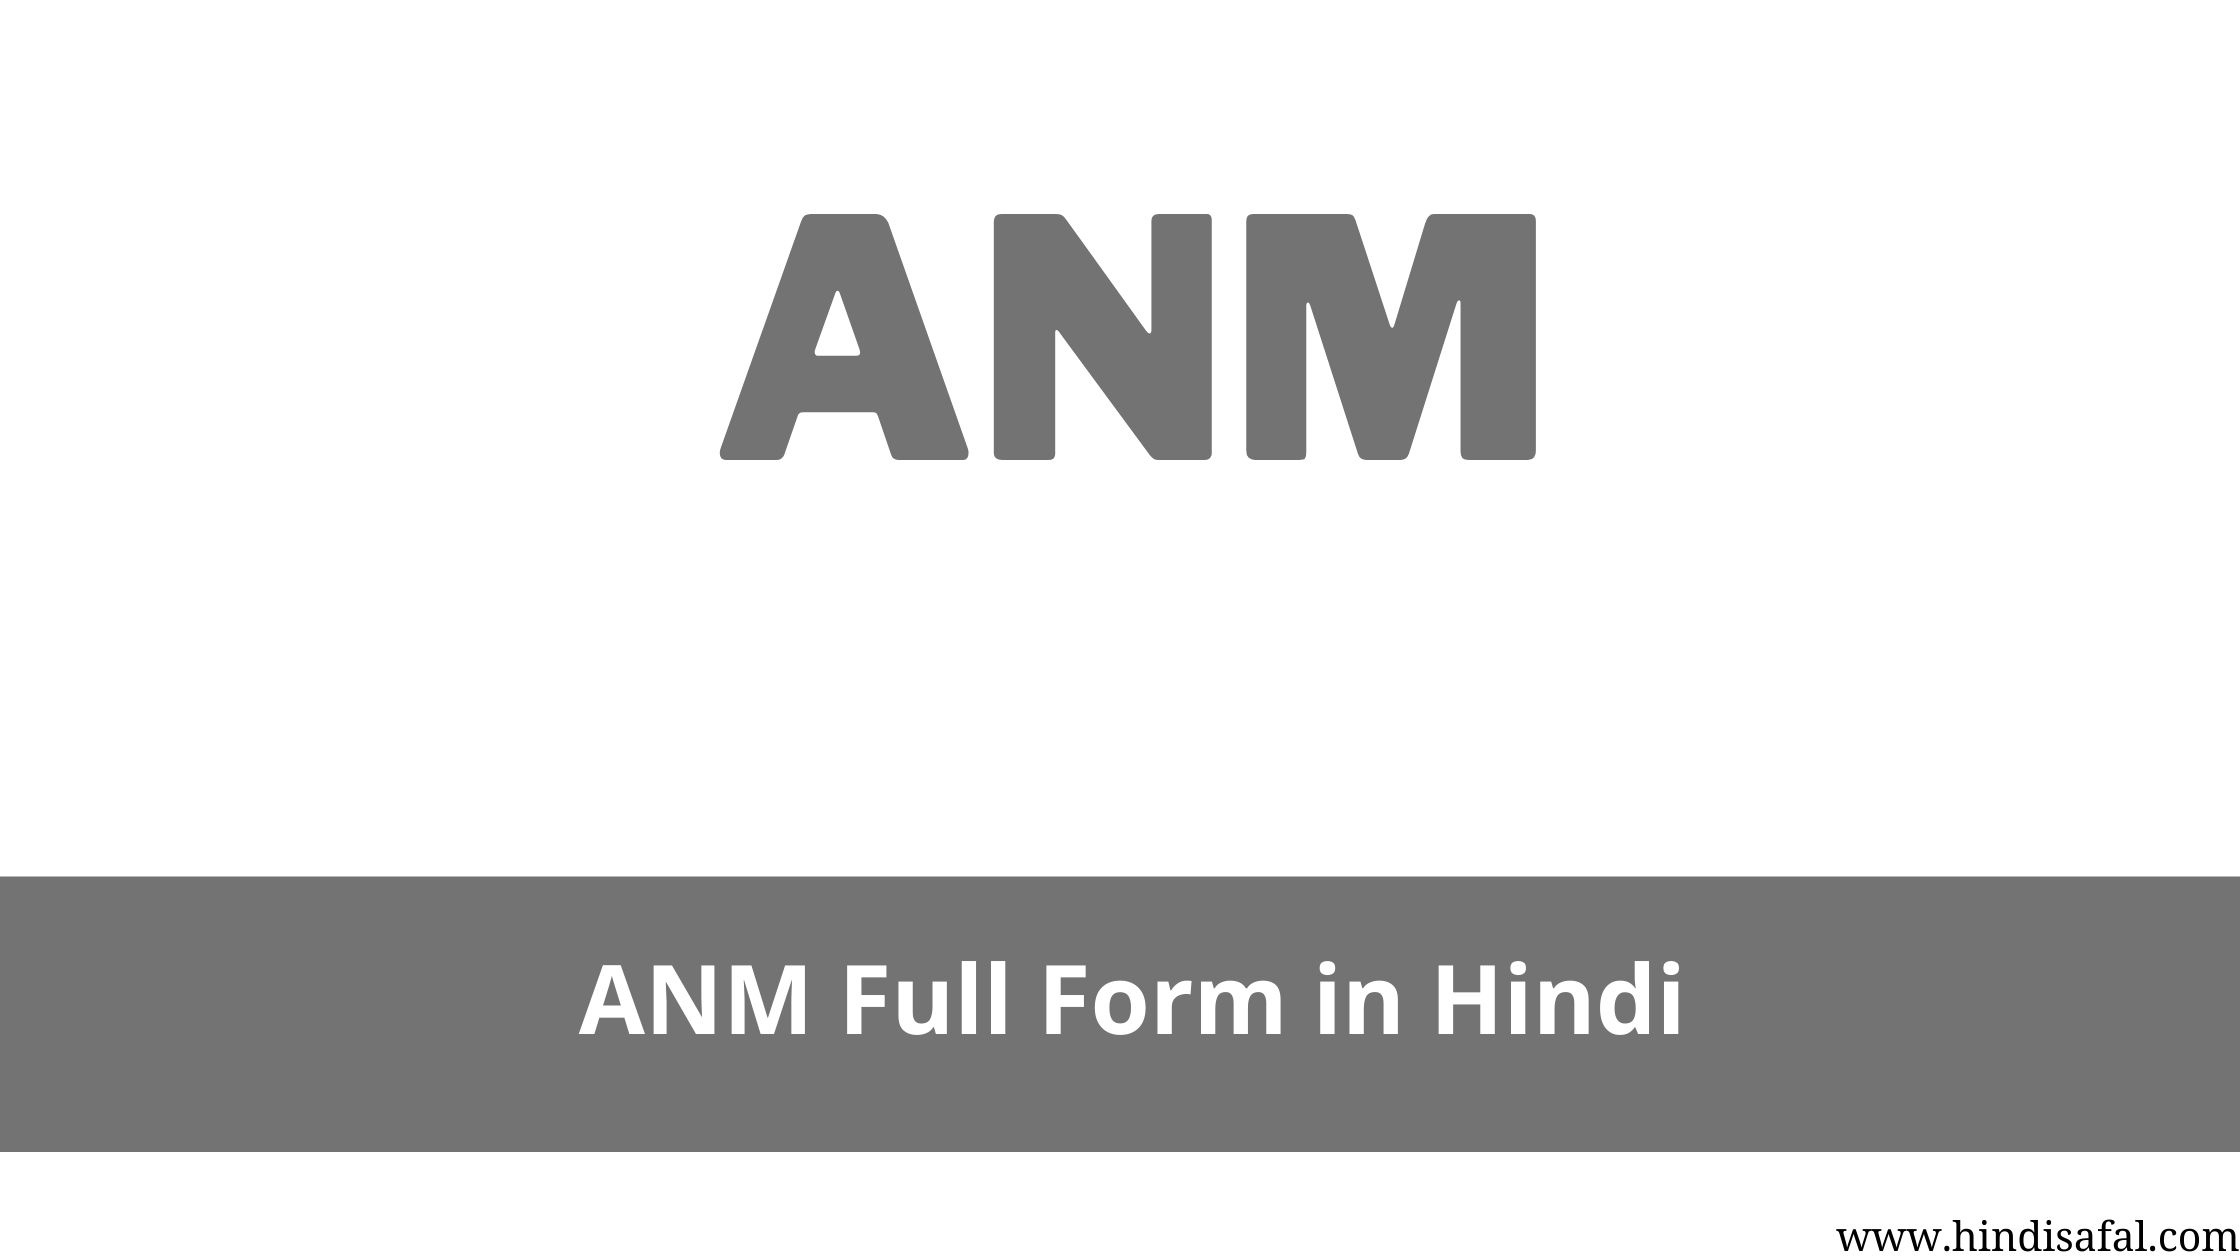 ANM Full Form in Hindi